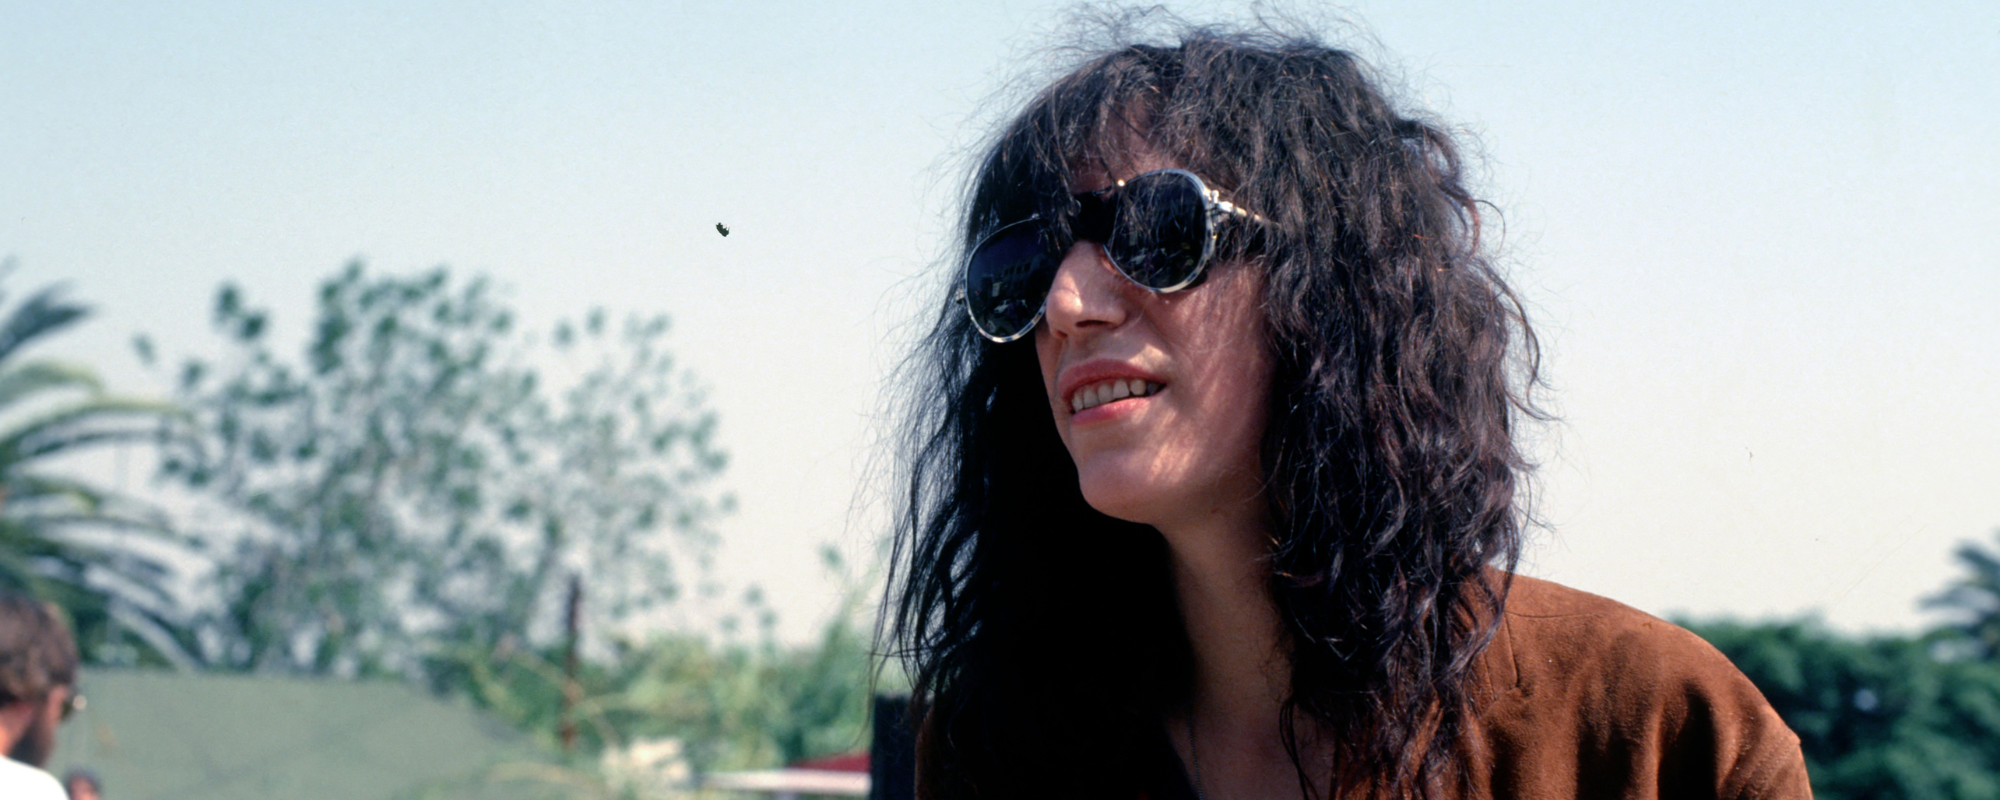 Humans Crossing Paths with the Divine: The Meaning Behind “Dancing Barefoot” by Patti Smith